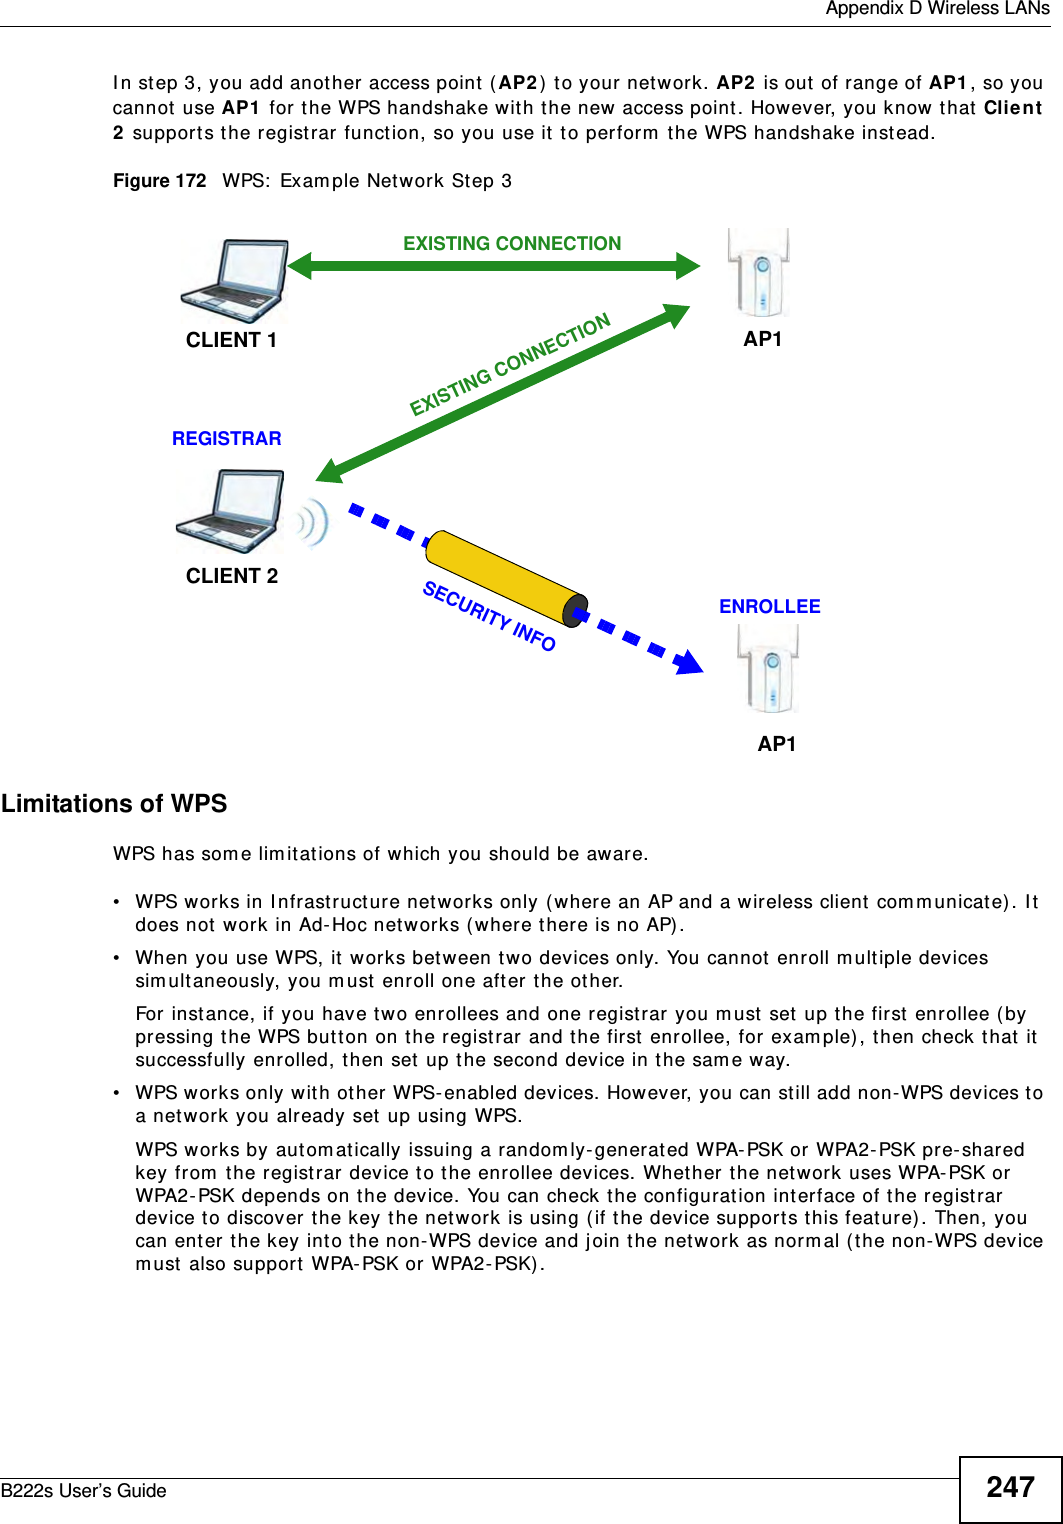  Appendix D Wireless LANsB222s User’s Guide 247I n step 3, you add another access point (AP2 )  t o your net w ork. AP2  is out  of range of AP1 , so you cannot  use AP1  for the WPS handshake w it h t he new access point . However, you know t hat  Clie n t  2 support s the registrar funct ion, so you use it  t o perform  t he WPS handshake inst ead.Figure 172   WPS:  Exam ple Network Step 3Limitations of WPSWPS has som e lim itat ions of which you should be aware. • WPS works in I nfrast ruct ure net works only ( where an AP and a wireless client com municate) . I t does not  work in Ad- Hoc net w orks (where there is no AP) .• When you use WPS, it wor ks bet ween t wo devices only. You cannot enroll m ultiple devices sim ultaneously, you m ust  enroll one after the other. For inst ance, if you have t w o enrollees and one registrar you m ust  set up t he first  enrollee ( by pressing the WPS but ton on t he registrar and the first enrollee, for exam ple) , t hen check t hat  it  successfully enrolled, t hen set  up the second device in t he sam e way.• WPS works only wit h other WPS-enabled devices. However, you can st ill add non-WPS devices t o a network you already set up using WPS. WPS works by aut om atically issuing a random ly- generat ed WPA- PSK or WPA2- PSK pre- shared key from  t he regist rar device to the enrollee devices. Whet her t he net work uses WPA-PSK or WPA2- PSK depends on t he device. You can check t he configurat ion int erface of t he regist rar device t o discover t he key the network is using ( if t he device support s this feat ure). Then, you can ent er the key into t he non-WPS device and j oin t he net work as norm al (t he non-WPS device m ust also support  WPA- PSK or WPA2- PSK) .CLIENT 1 AP1REGISTRARCLIENT 2EXISTING CONNECTIONSECURITY INFOENROLLEEAP1EXISTING CONNECTION